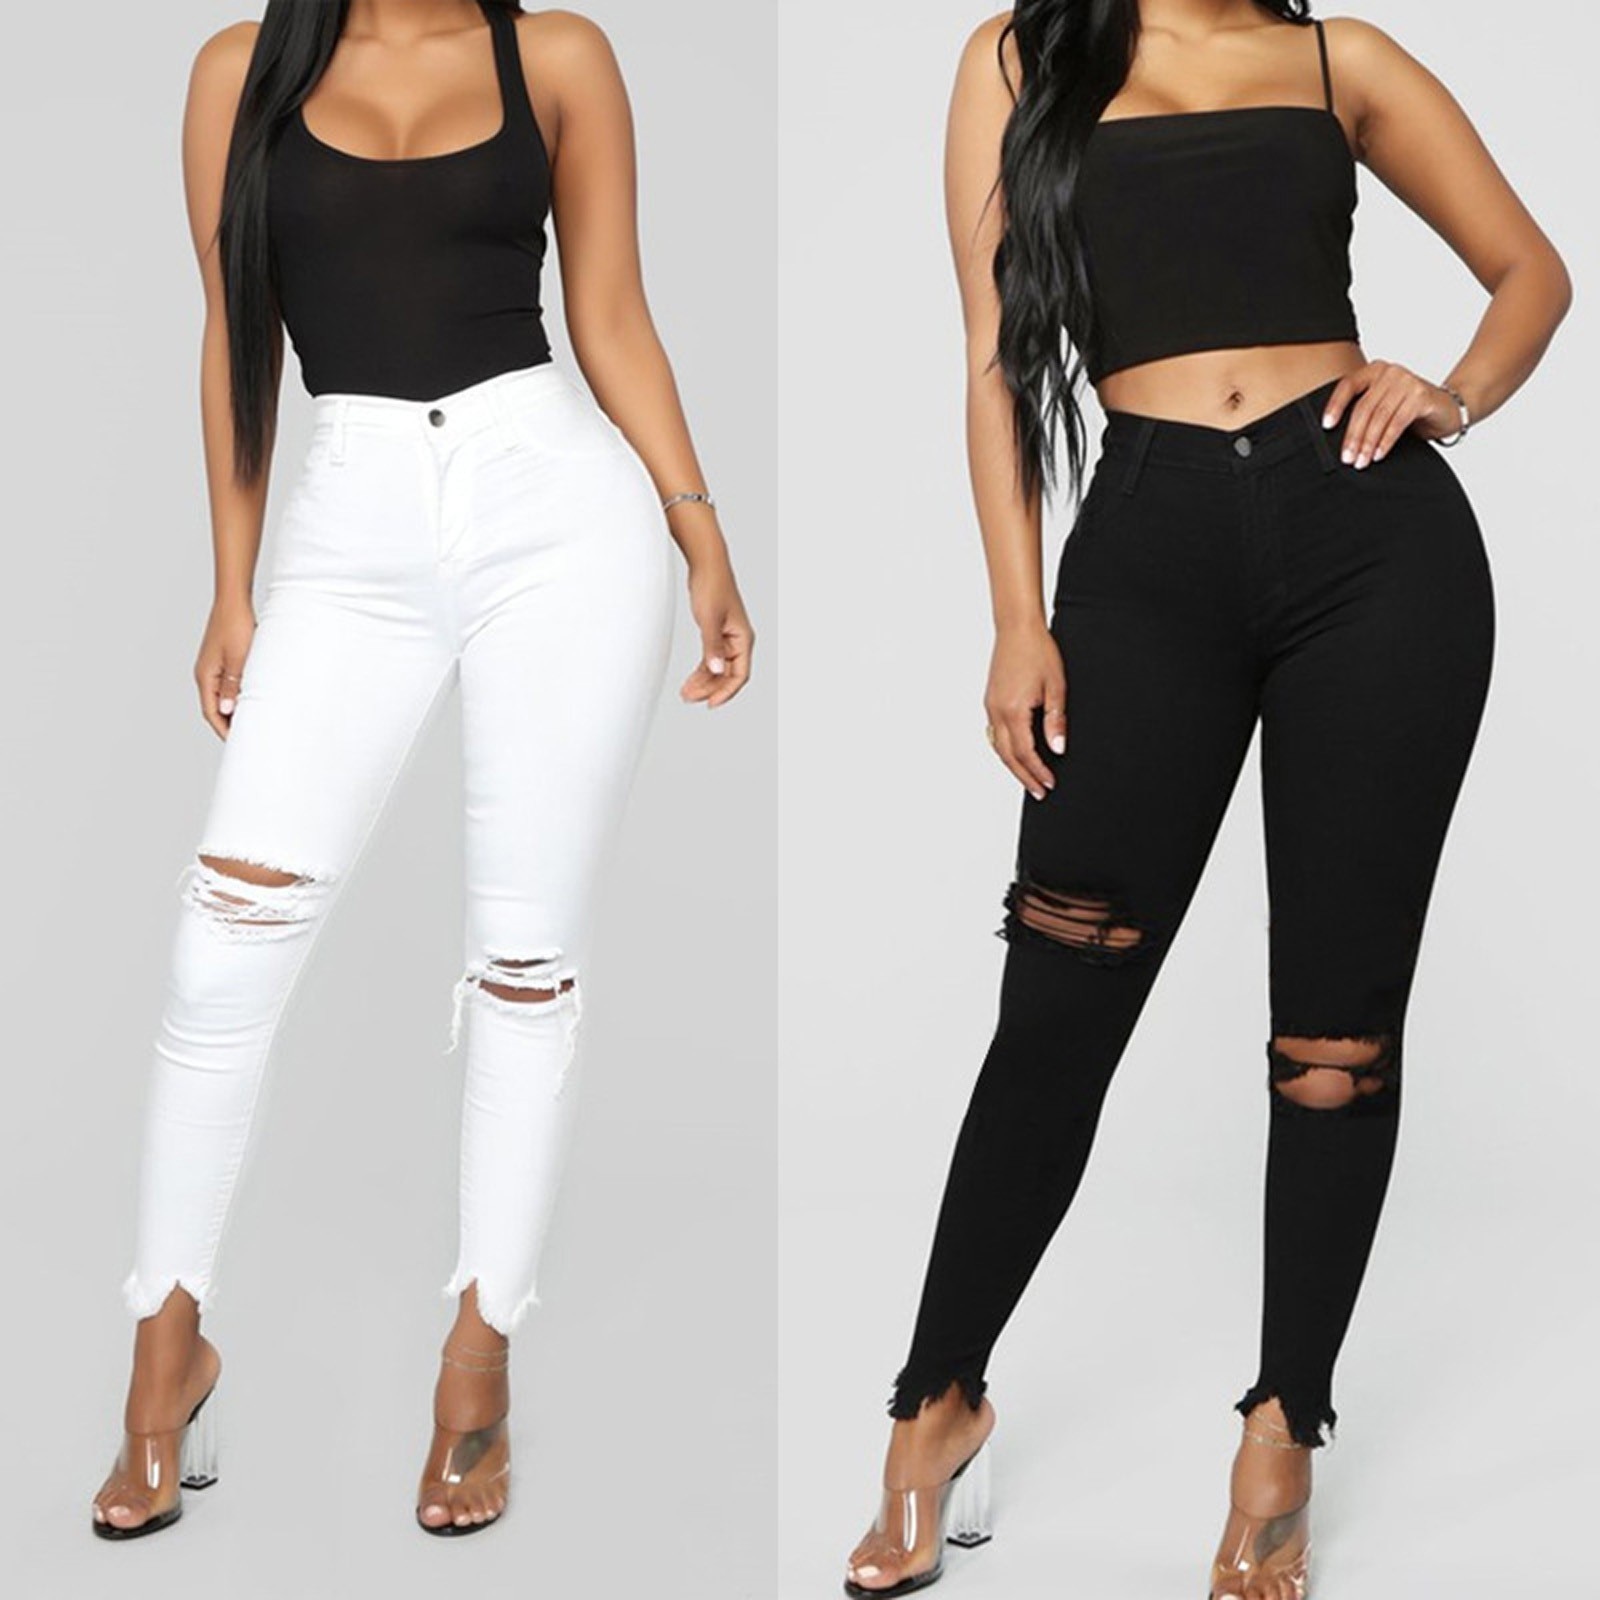  м û   ָ ÷  û  ұĢ   Ϲ  Mid-Waisted Streetwear Jeans